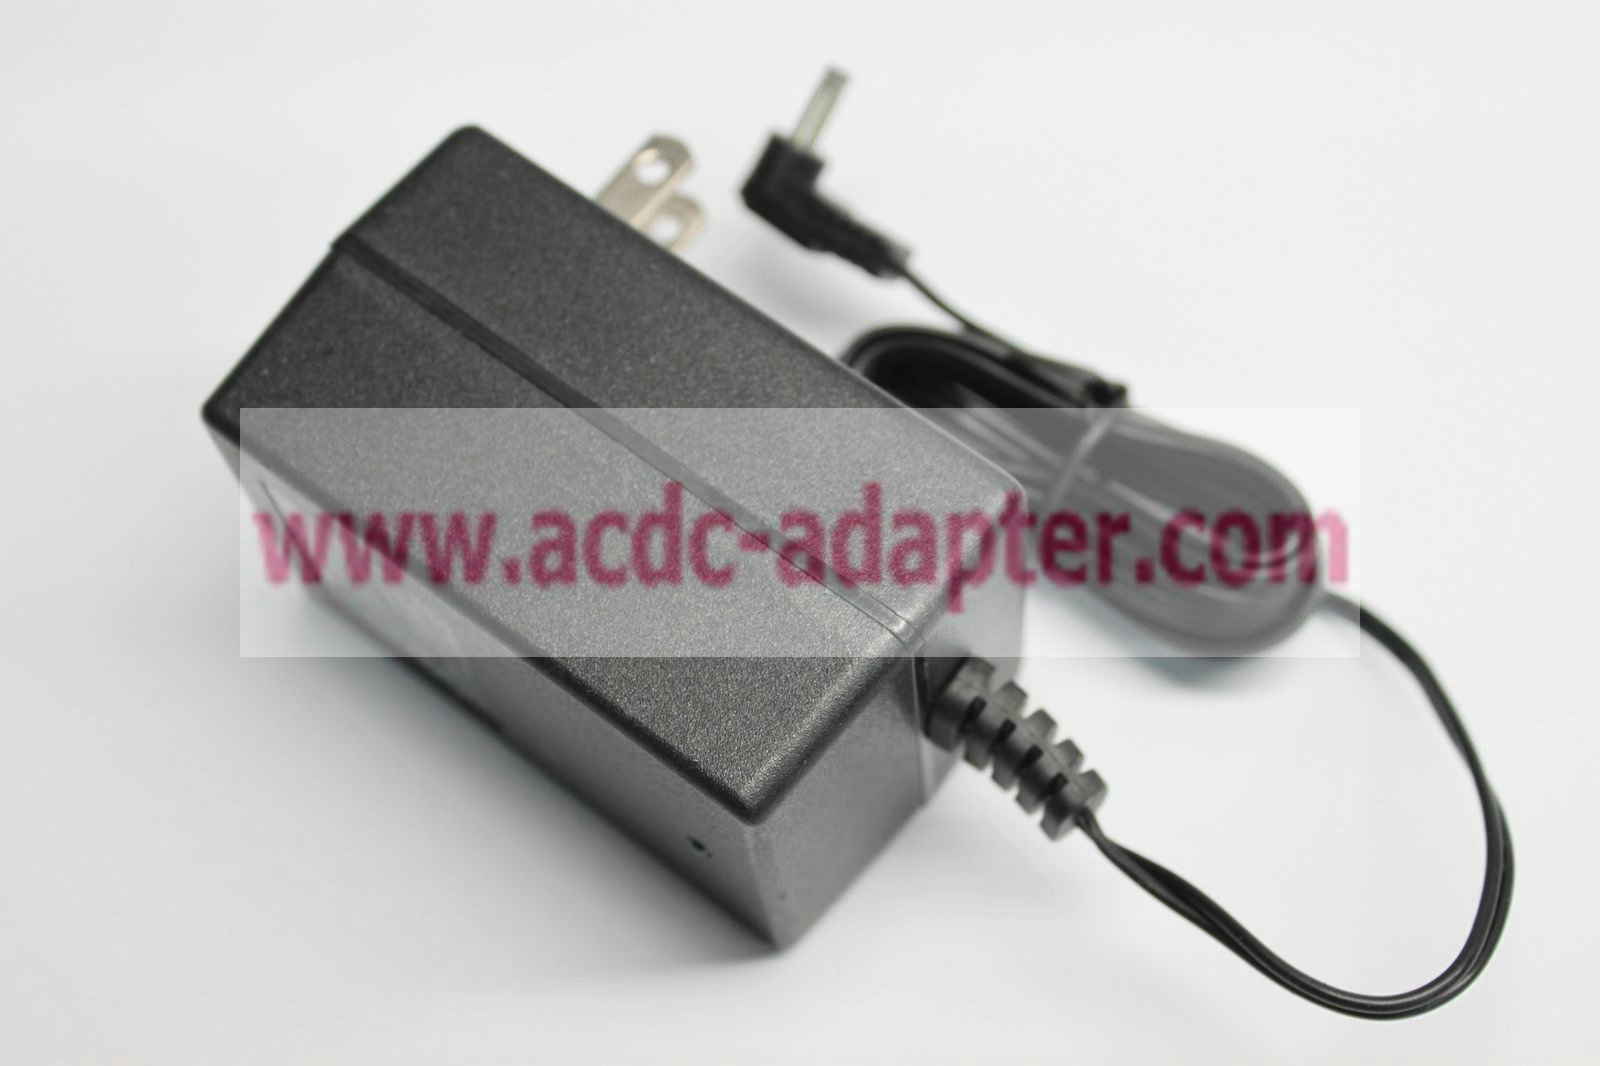 Genuine Actiontec AD-1260 Adapter Power Supply 12VDC 600mA Plug-In Class 2 Transfo